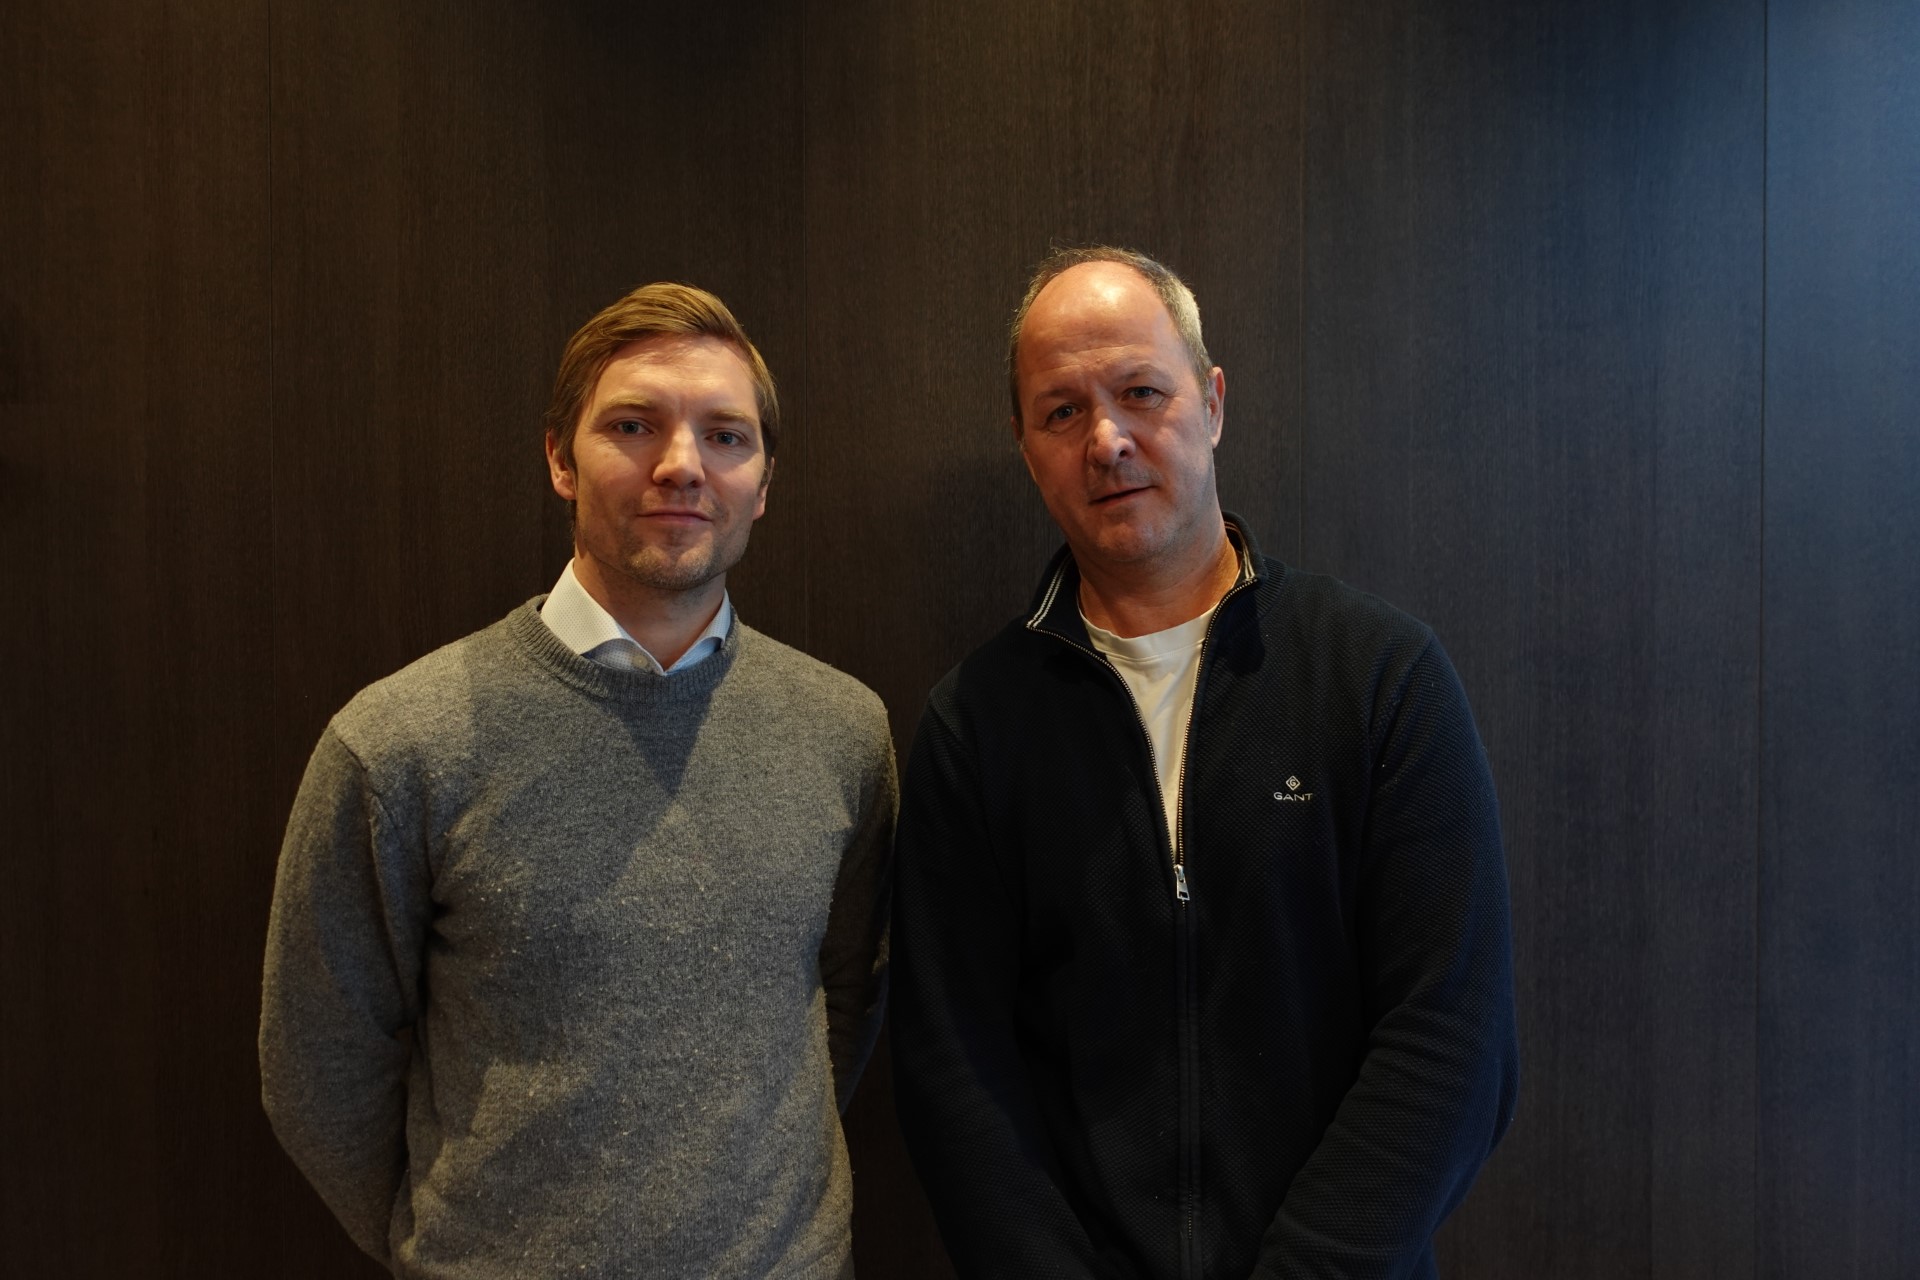 From the  left - Tor Olav Seim, head of business development and founder of Ode and (right)  Claus Opshaug CEO and founder of C Food.